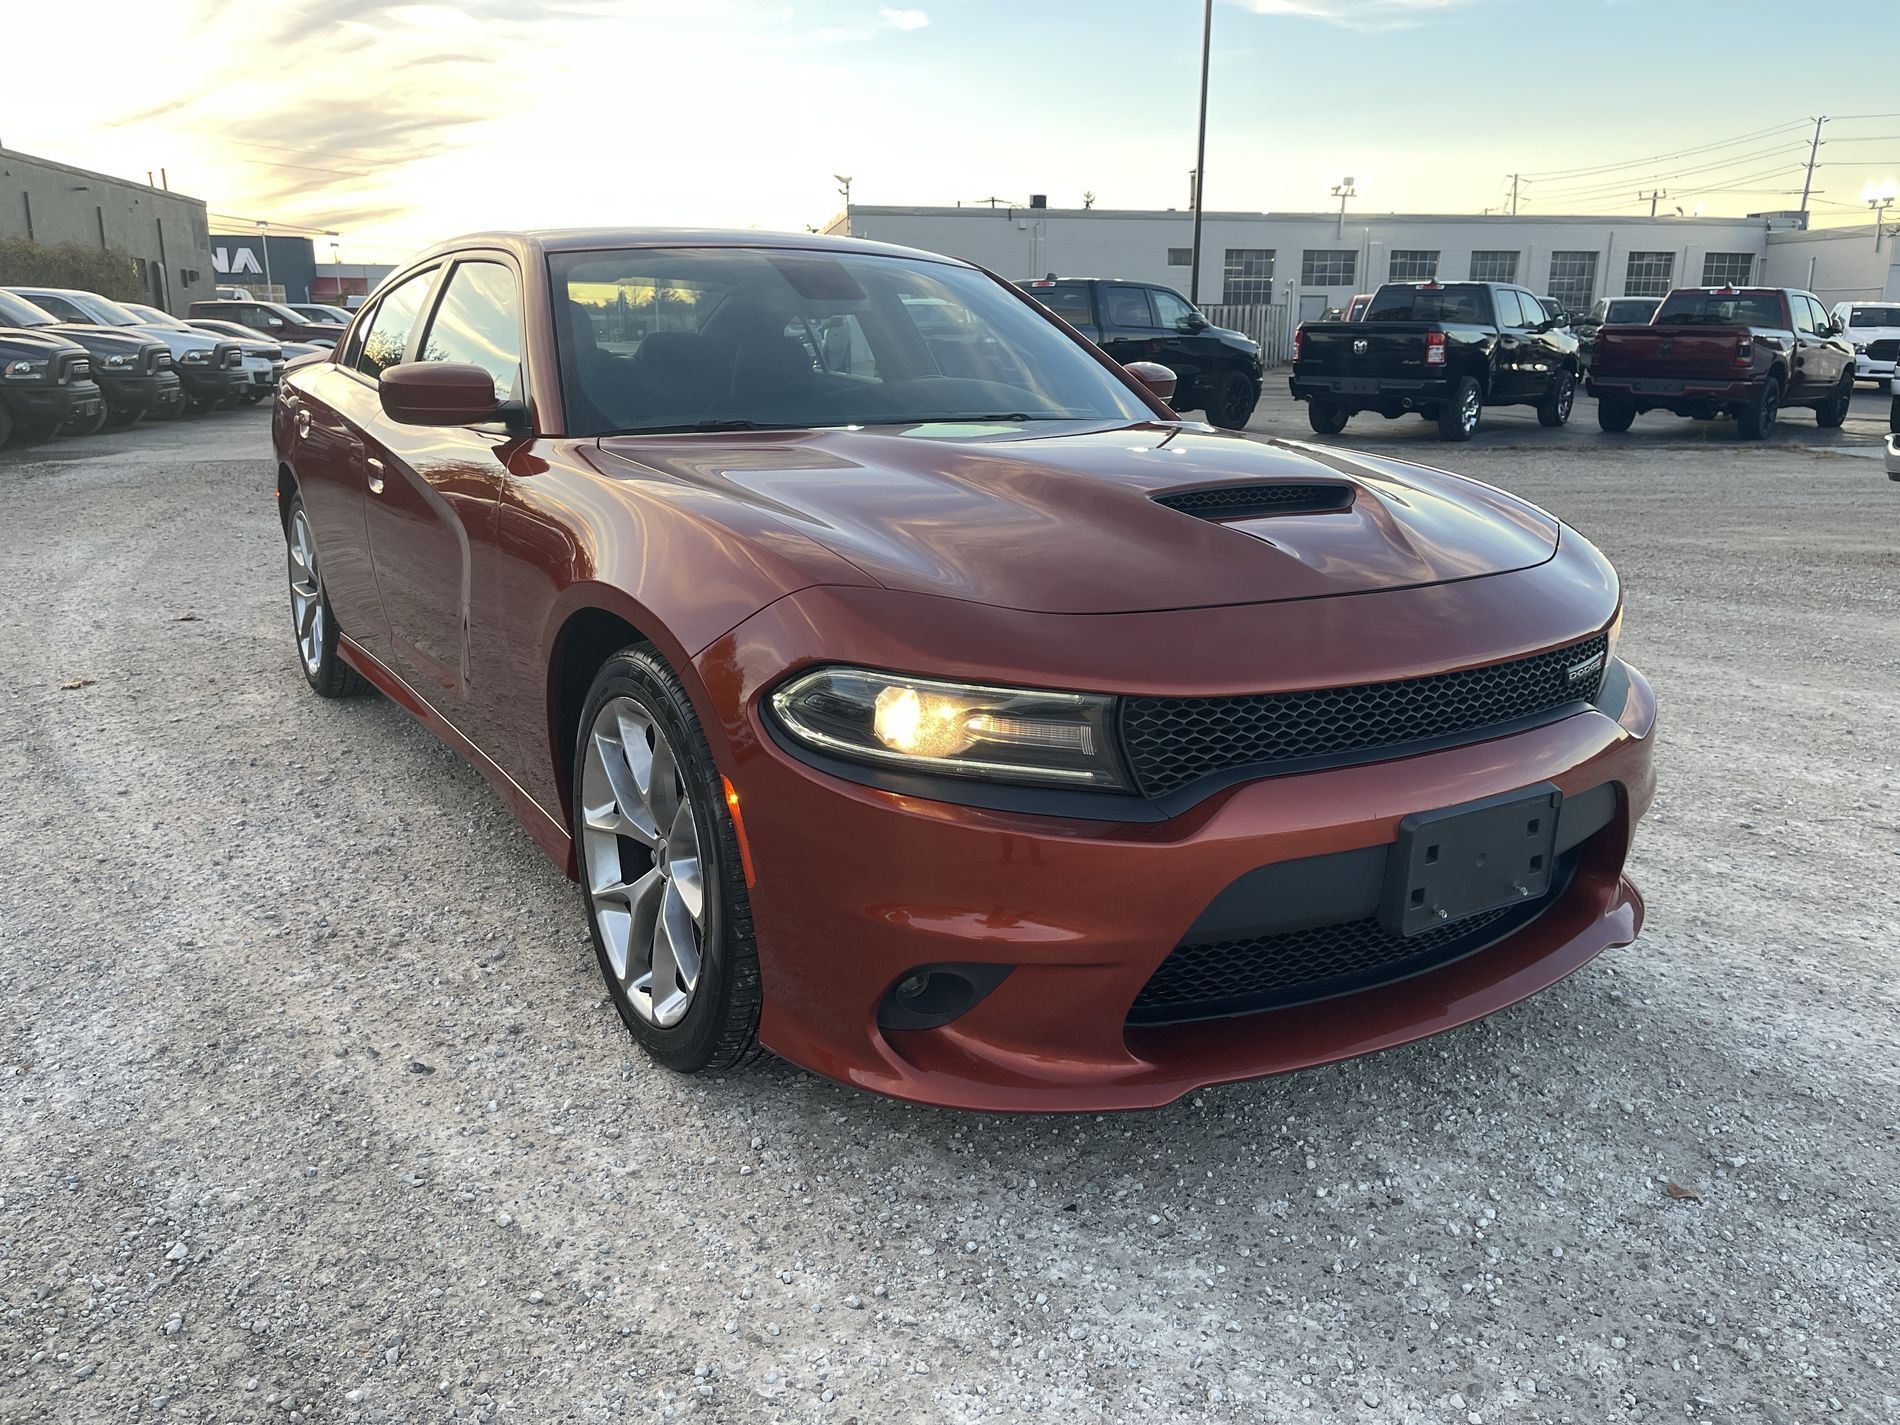 2021 Dodge Charger GT RWD - 300hp Rating